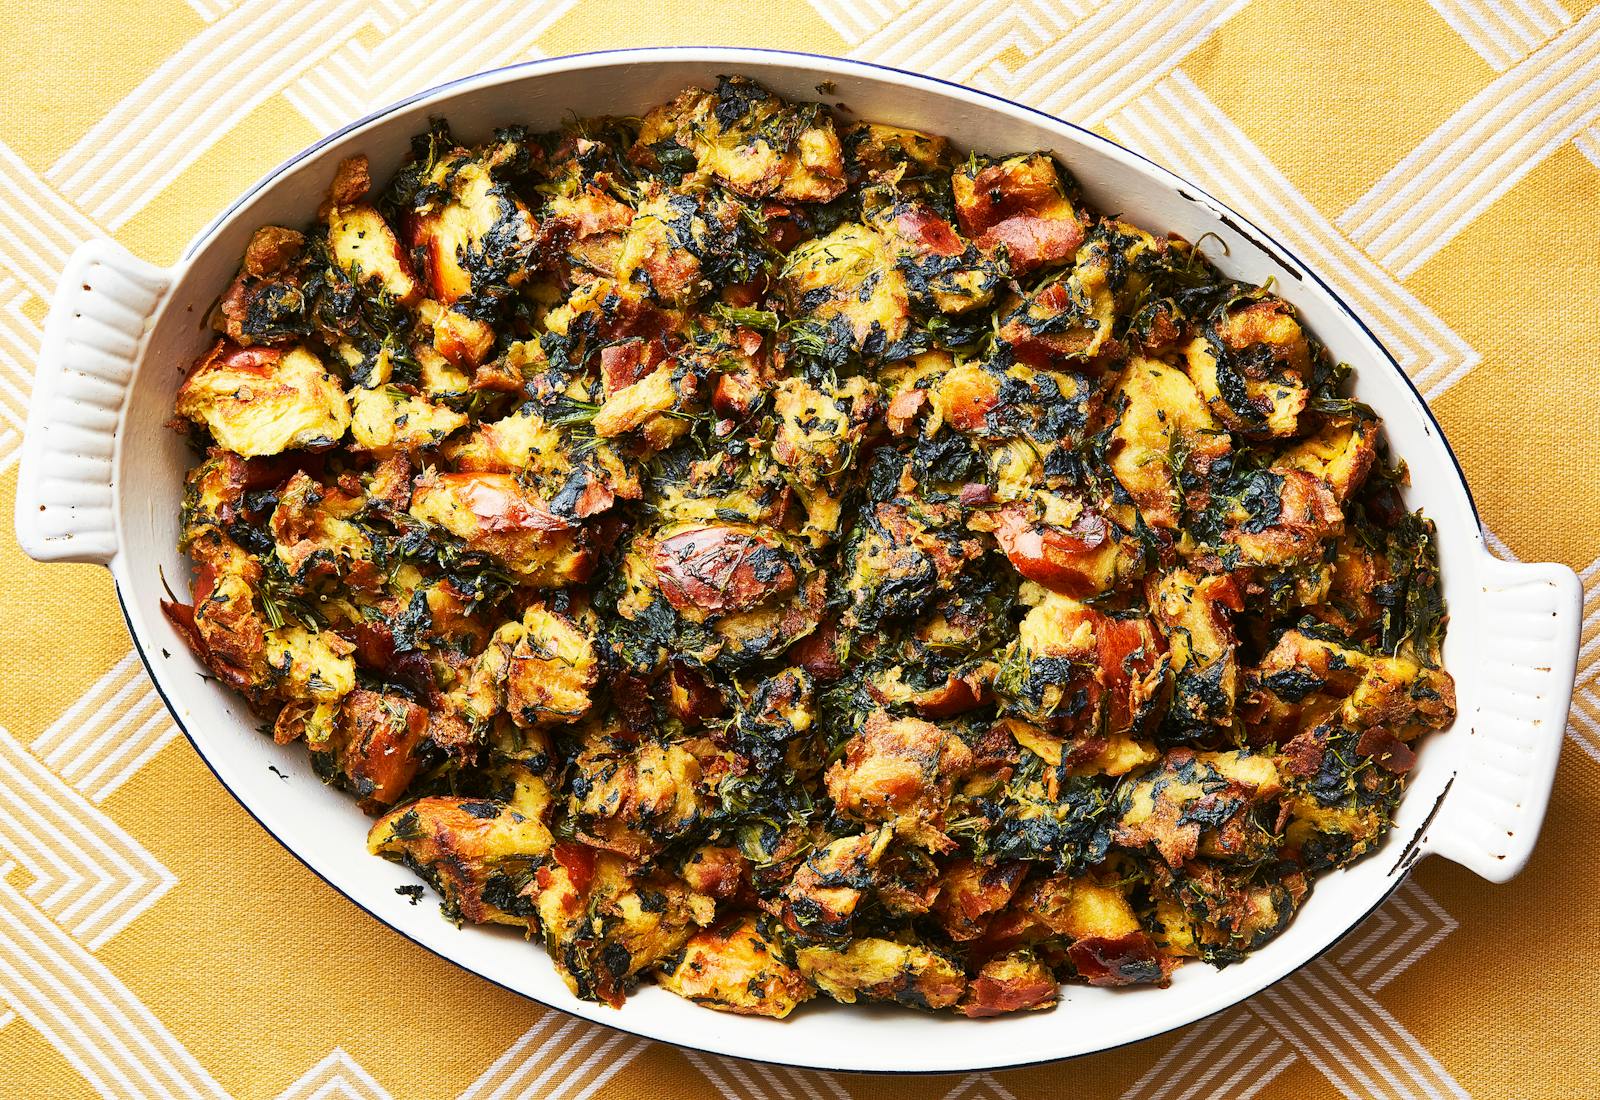 Spinach and challah stuffing in large serving dish.